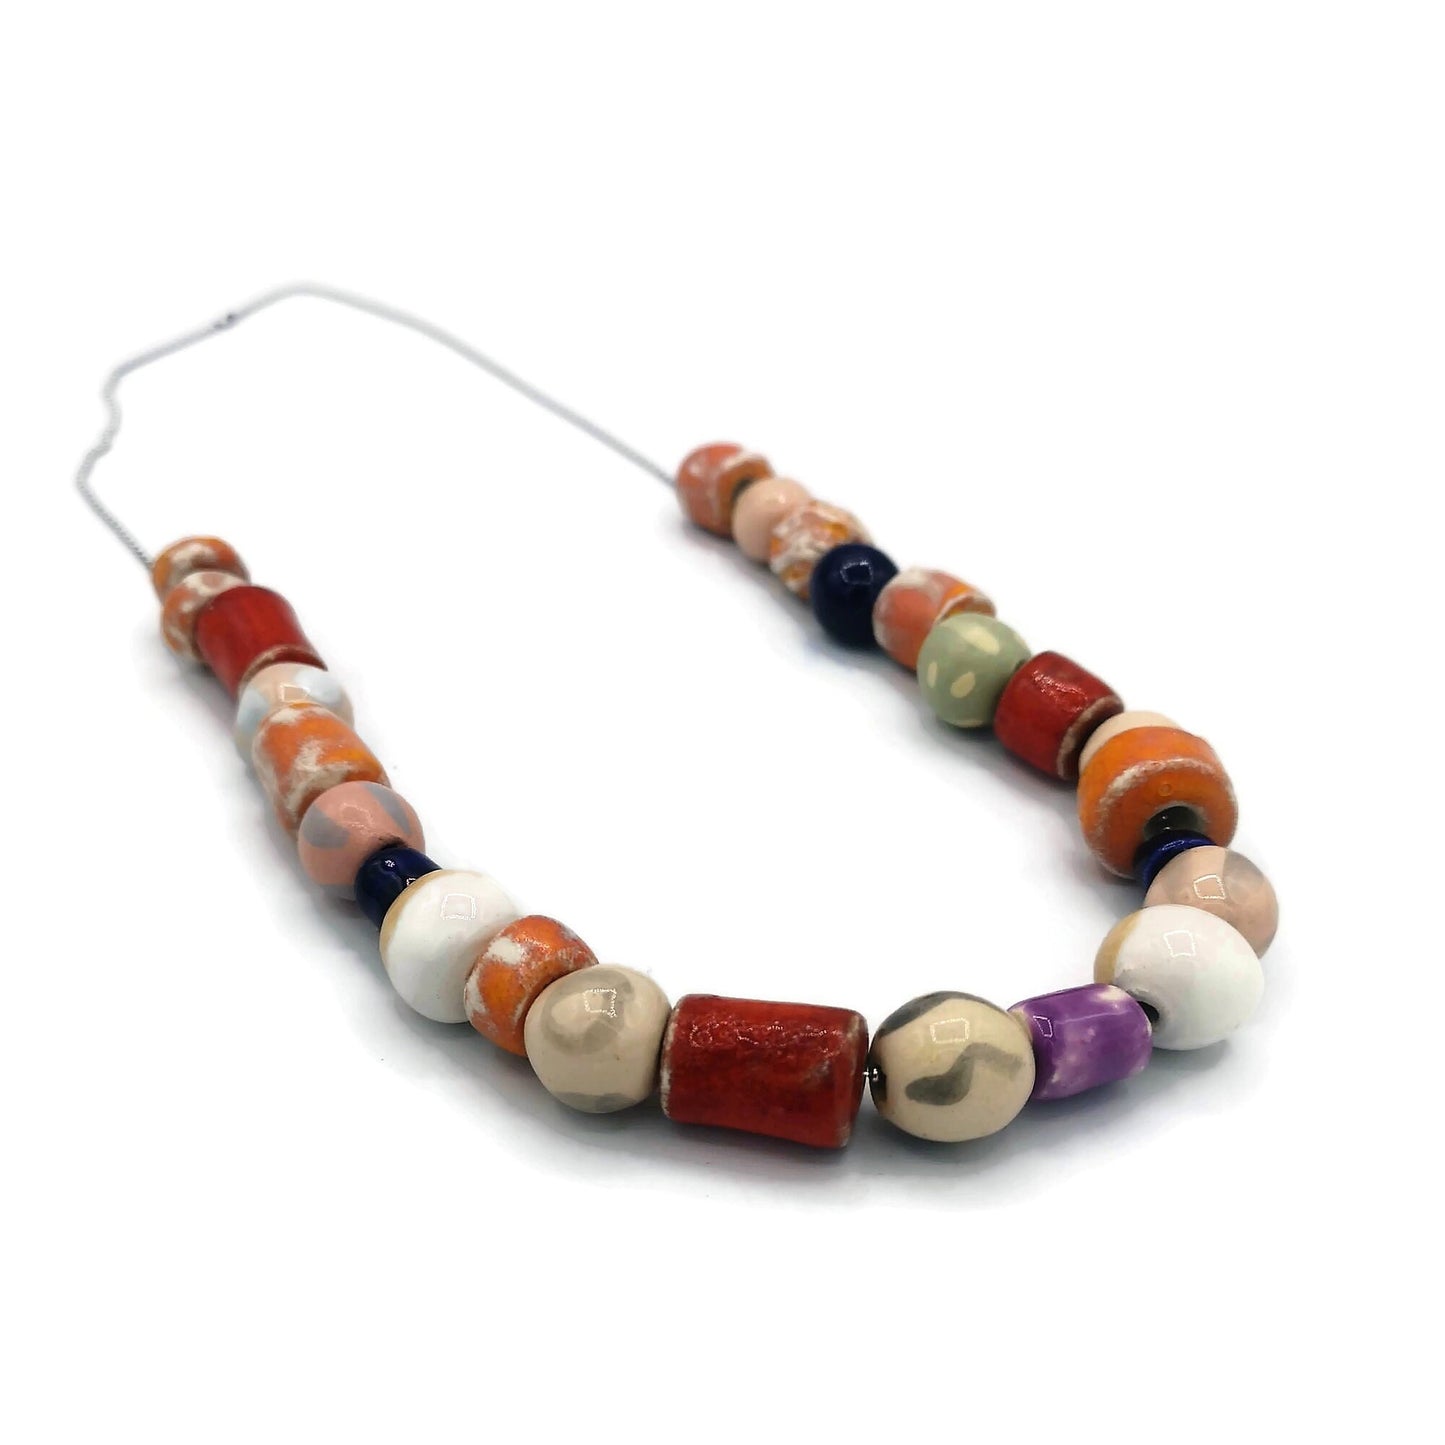 Handmade Ceramic Aesthetic Beaded Necklace For Women, Chunky Colorful Clay Statement Jewelry Best Gift For Her, 9th Aniversary Gift For Wife - Ceramica Ana Rafael